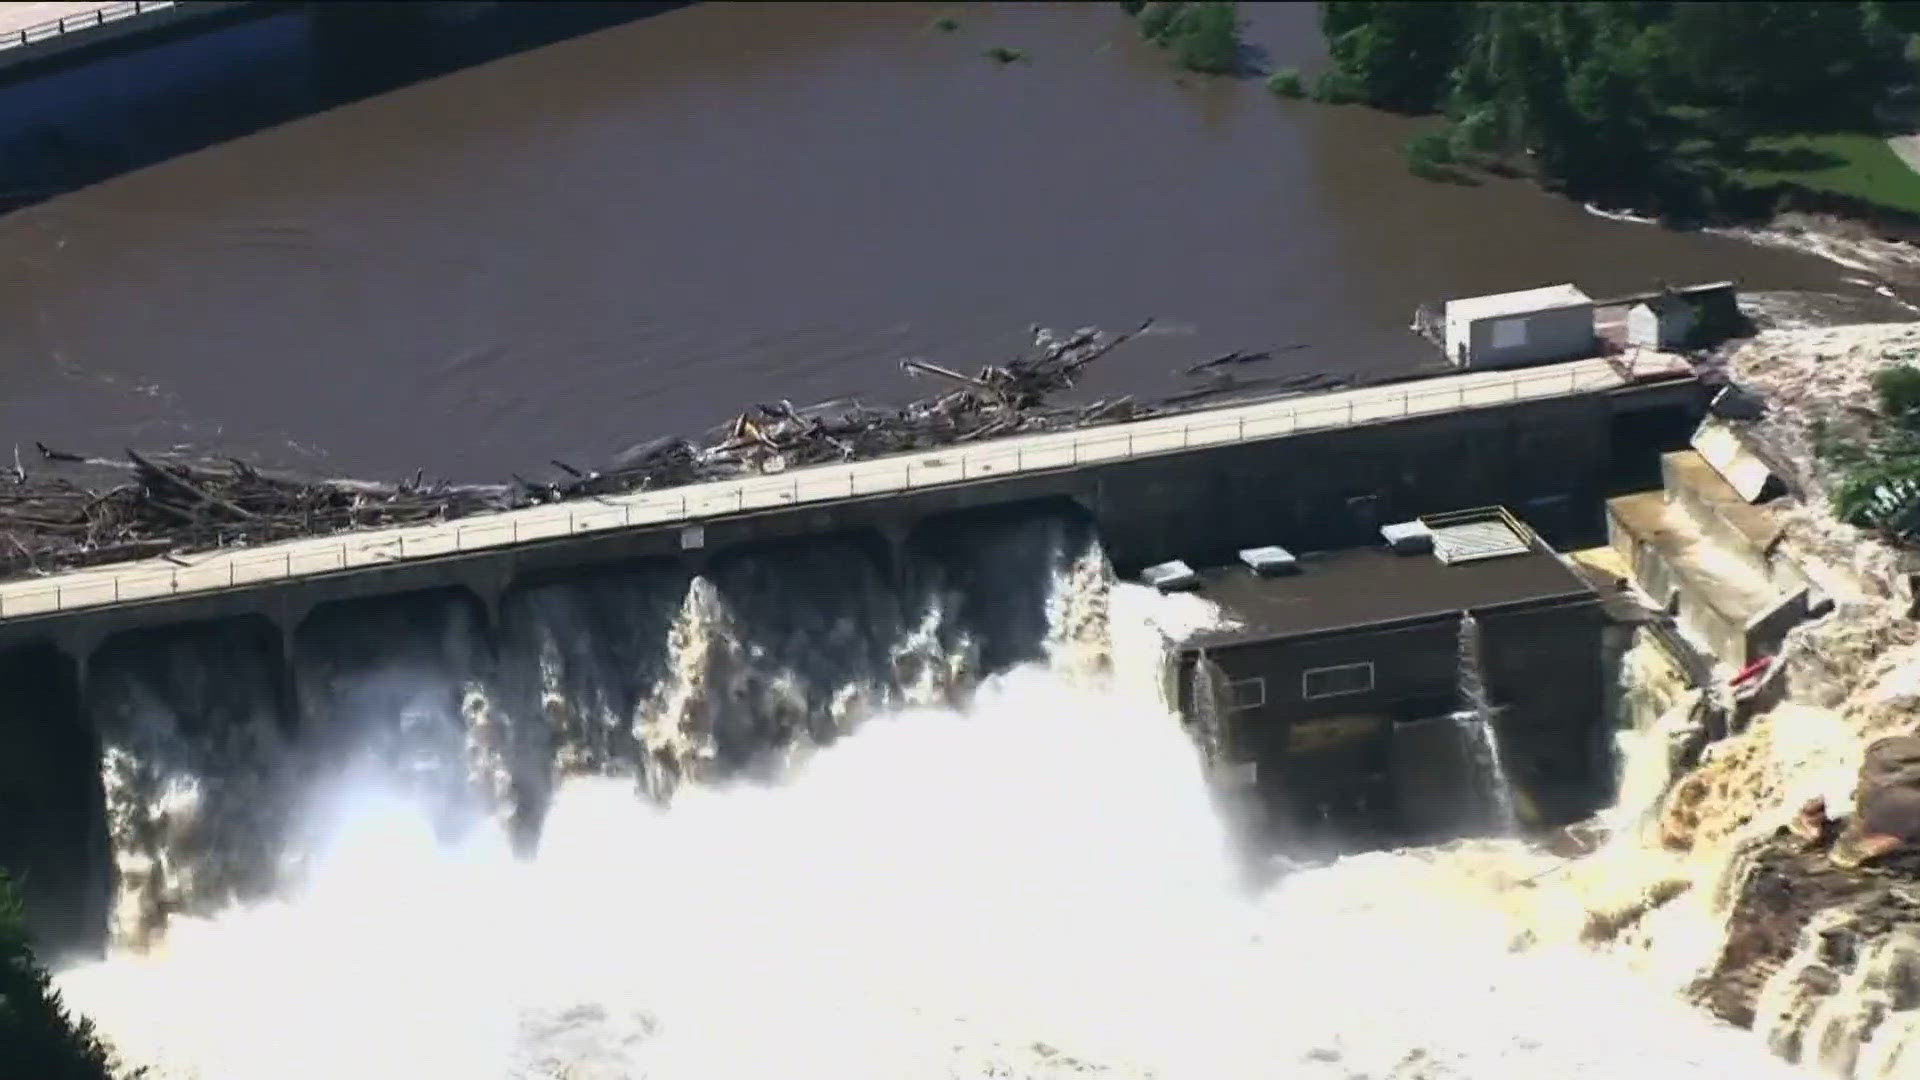 A build-up of debris has county officials monitoring the dam in Rapidan Township.